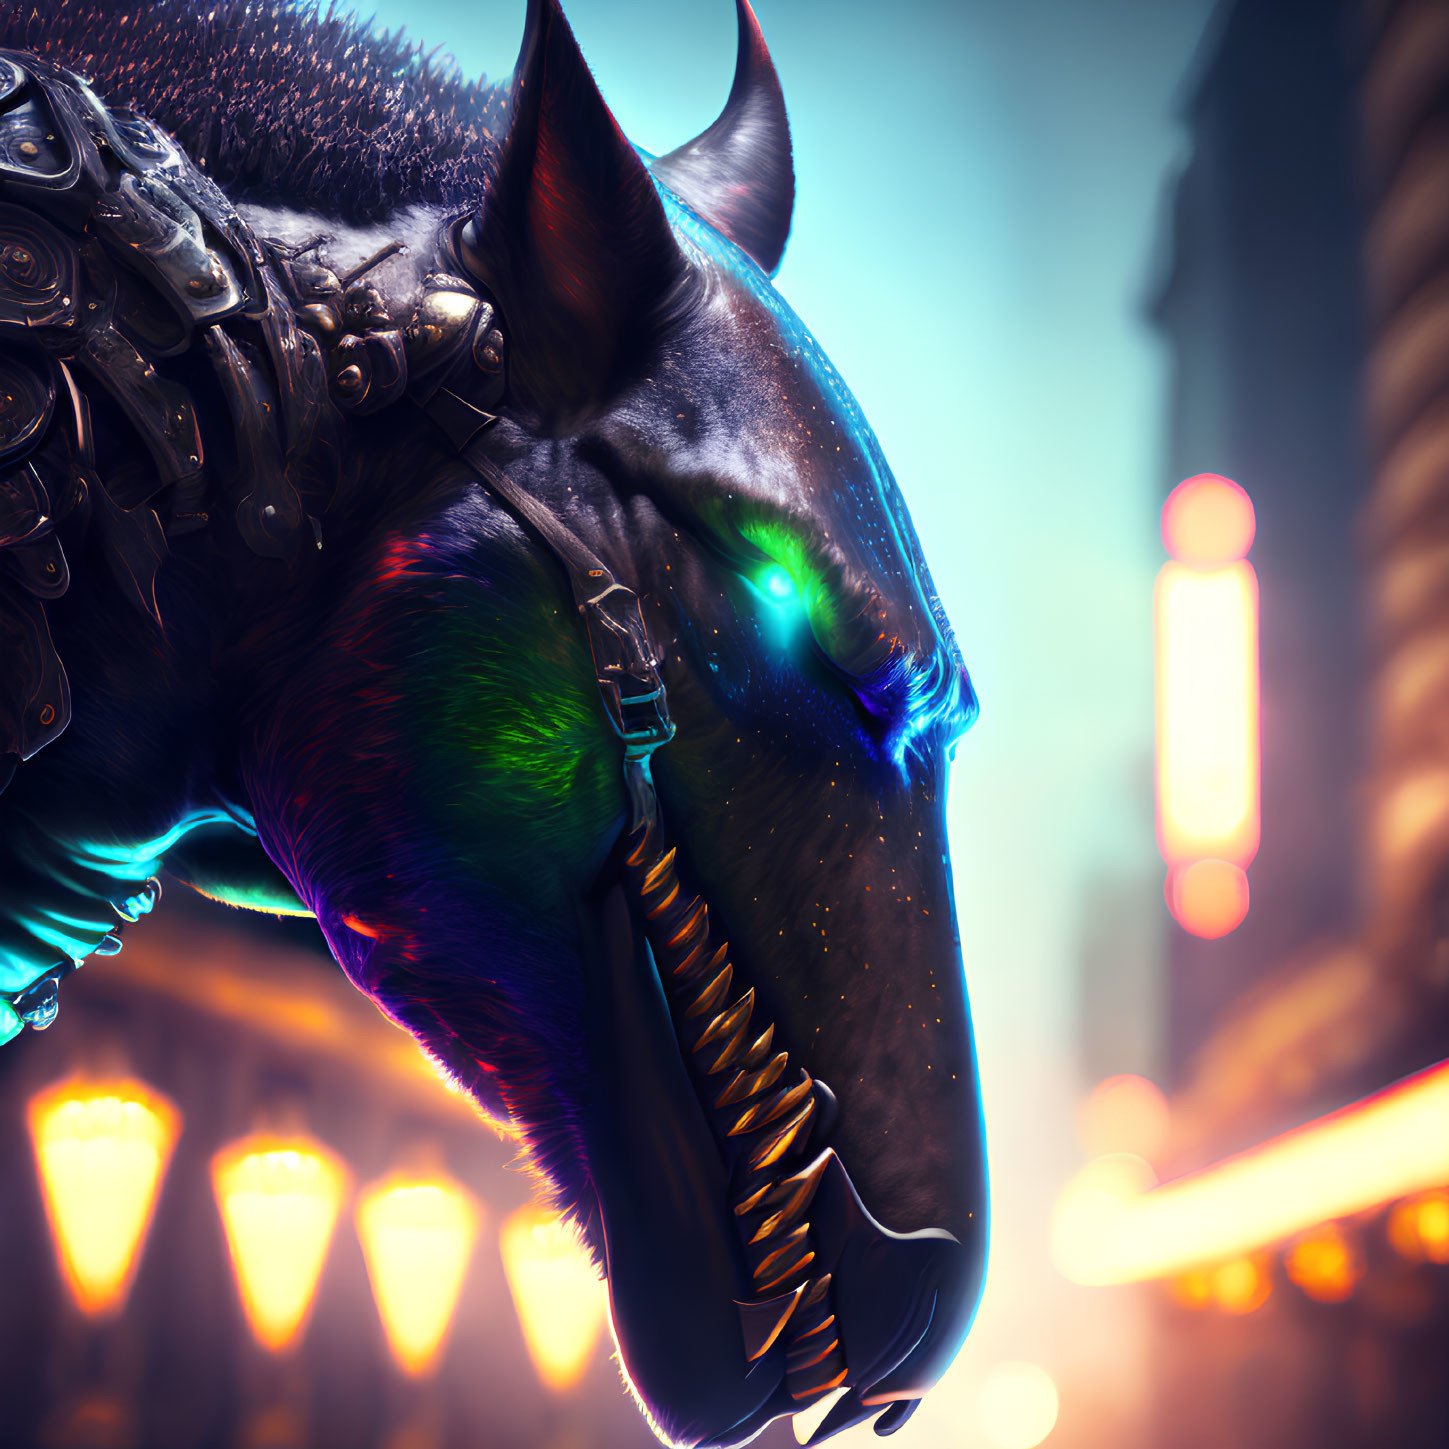 Detailed Cybernetic Wolf Head with Glowing Eyes in Neon-lit Urban Setting